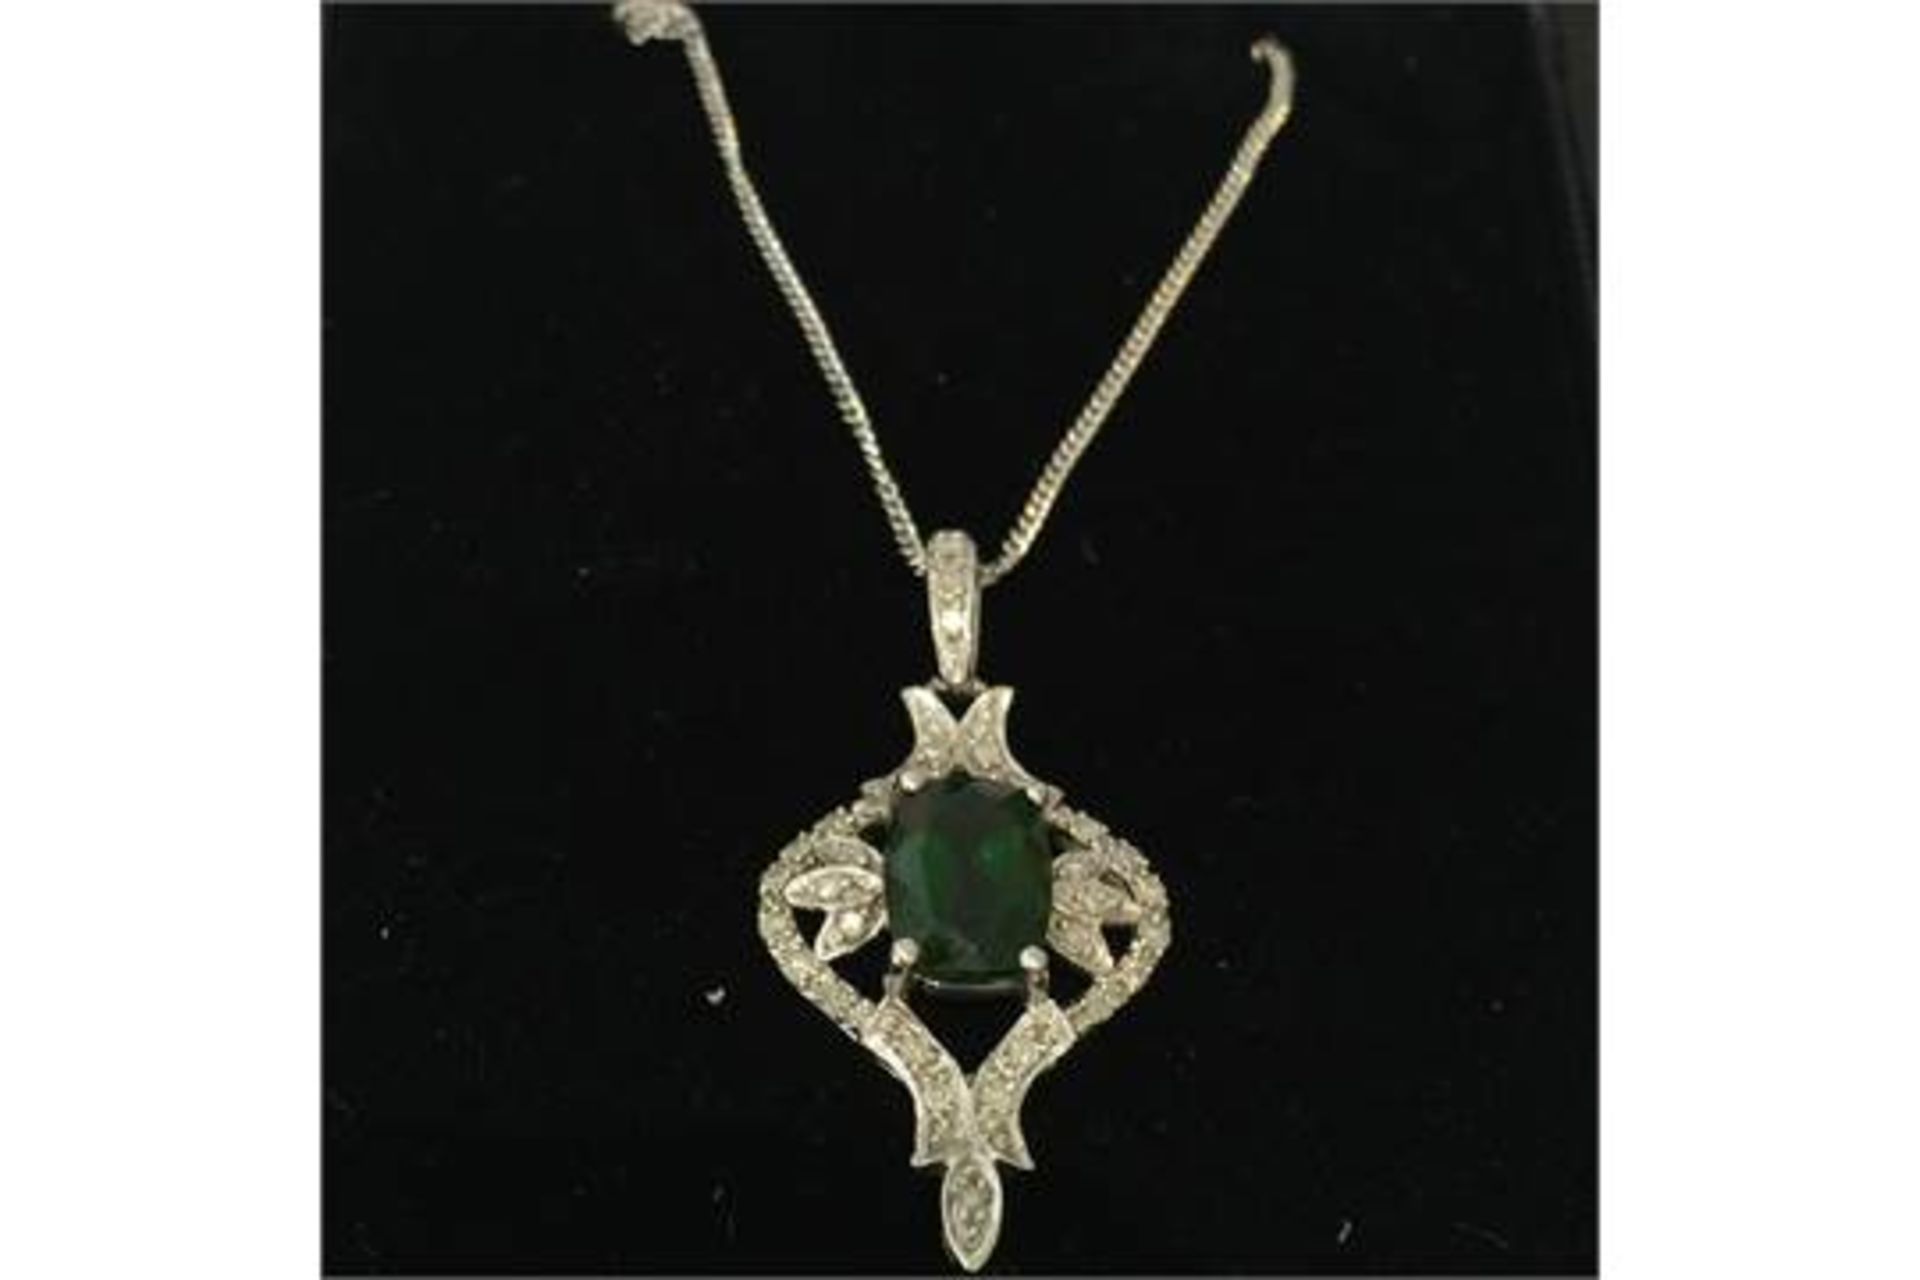 9ct Gold Diamond Encrusted Green Stone Pendant - Marked 375 -Tested as 9ct